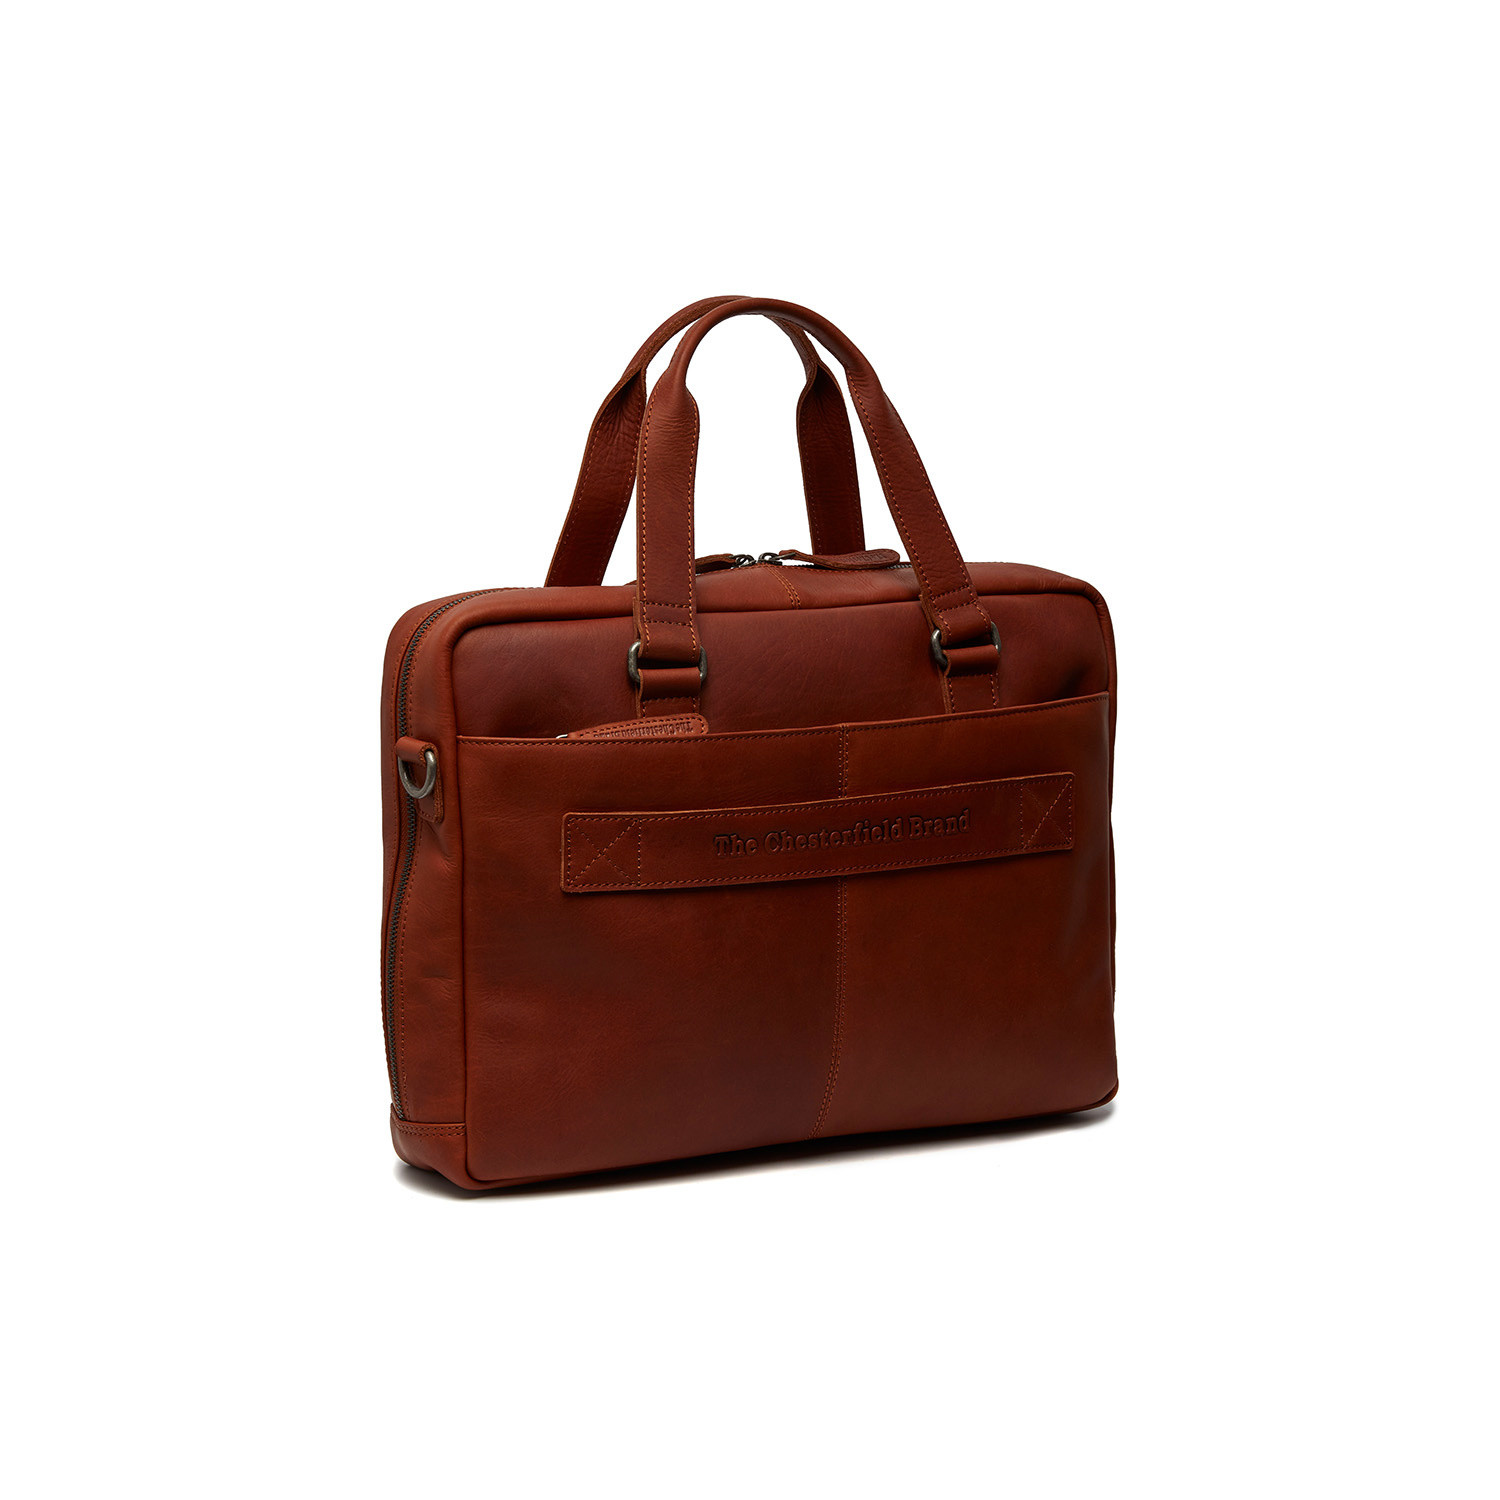 Leather Backpack Cognac Austin - The Chesterfield Brand